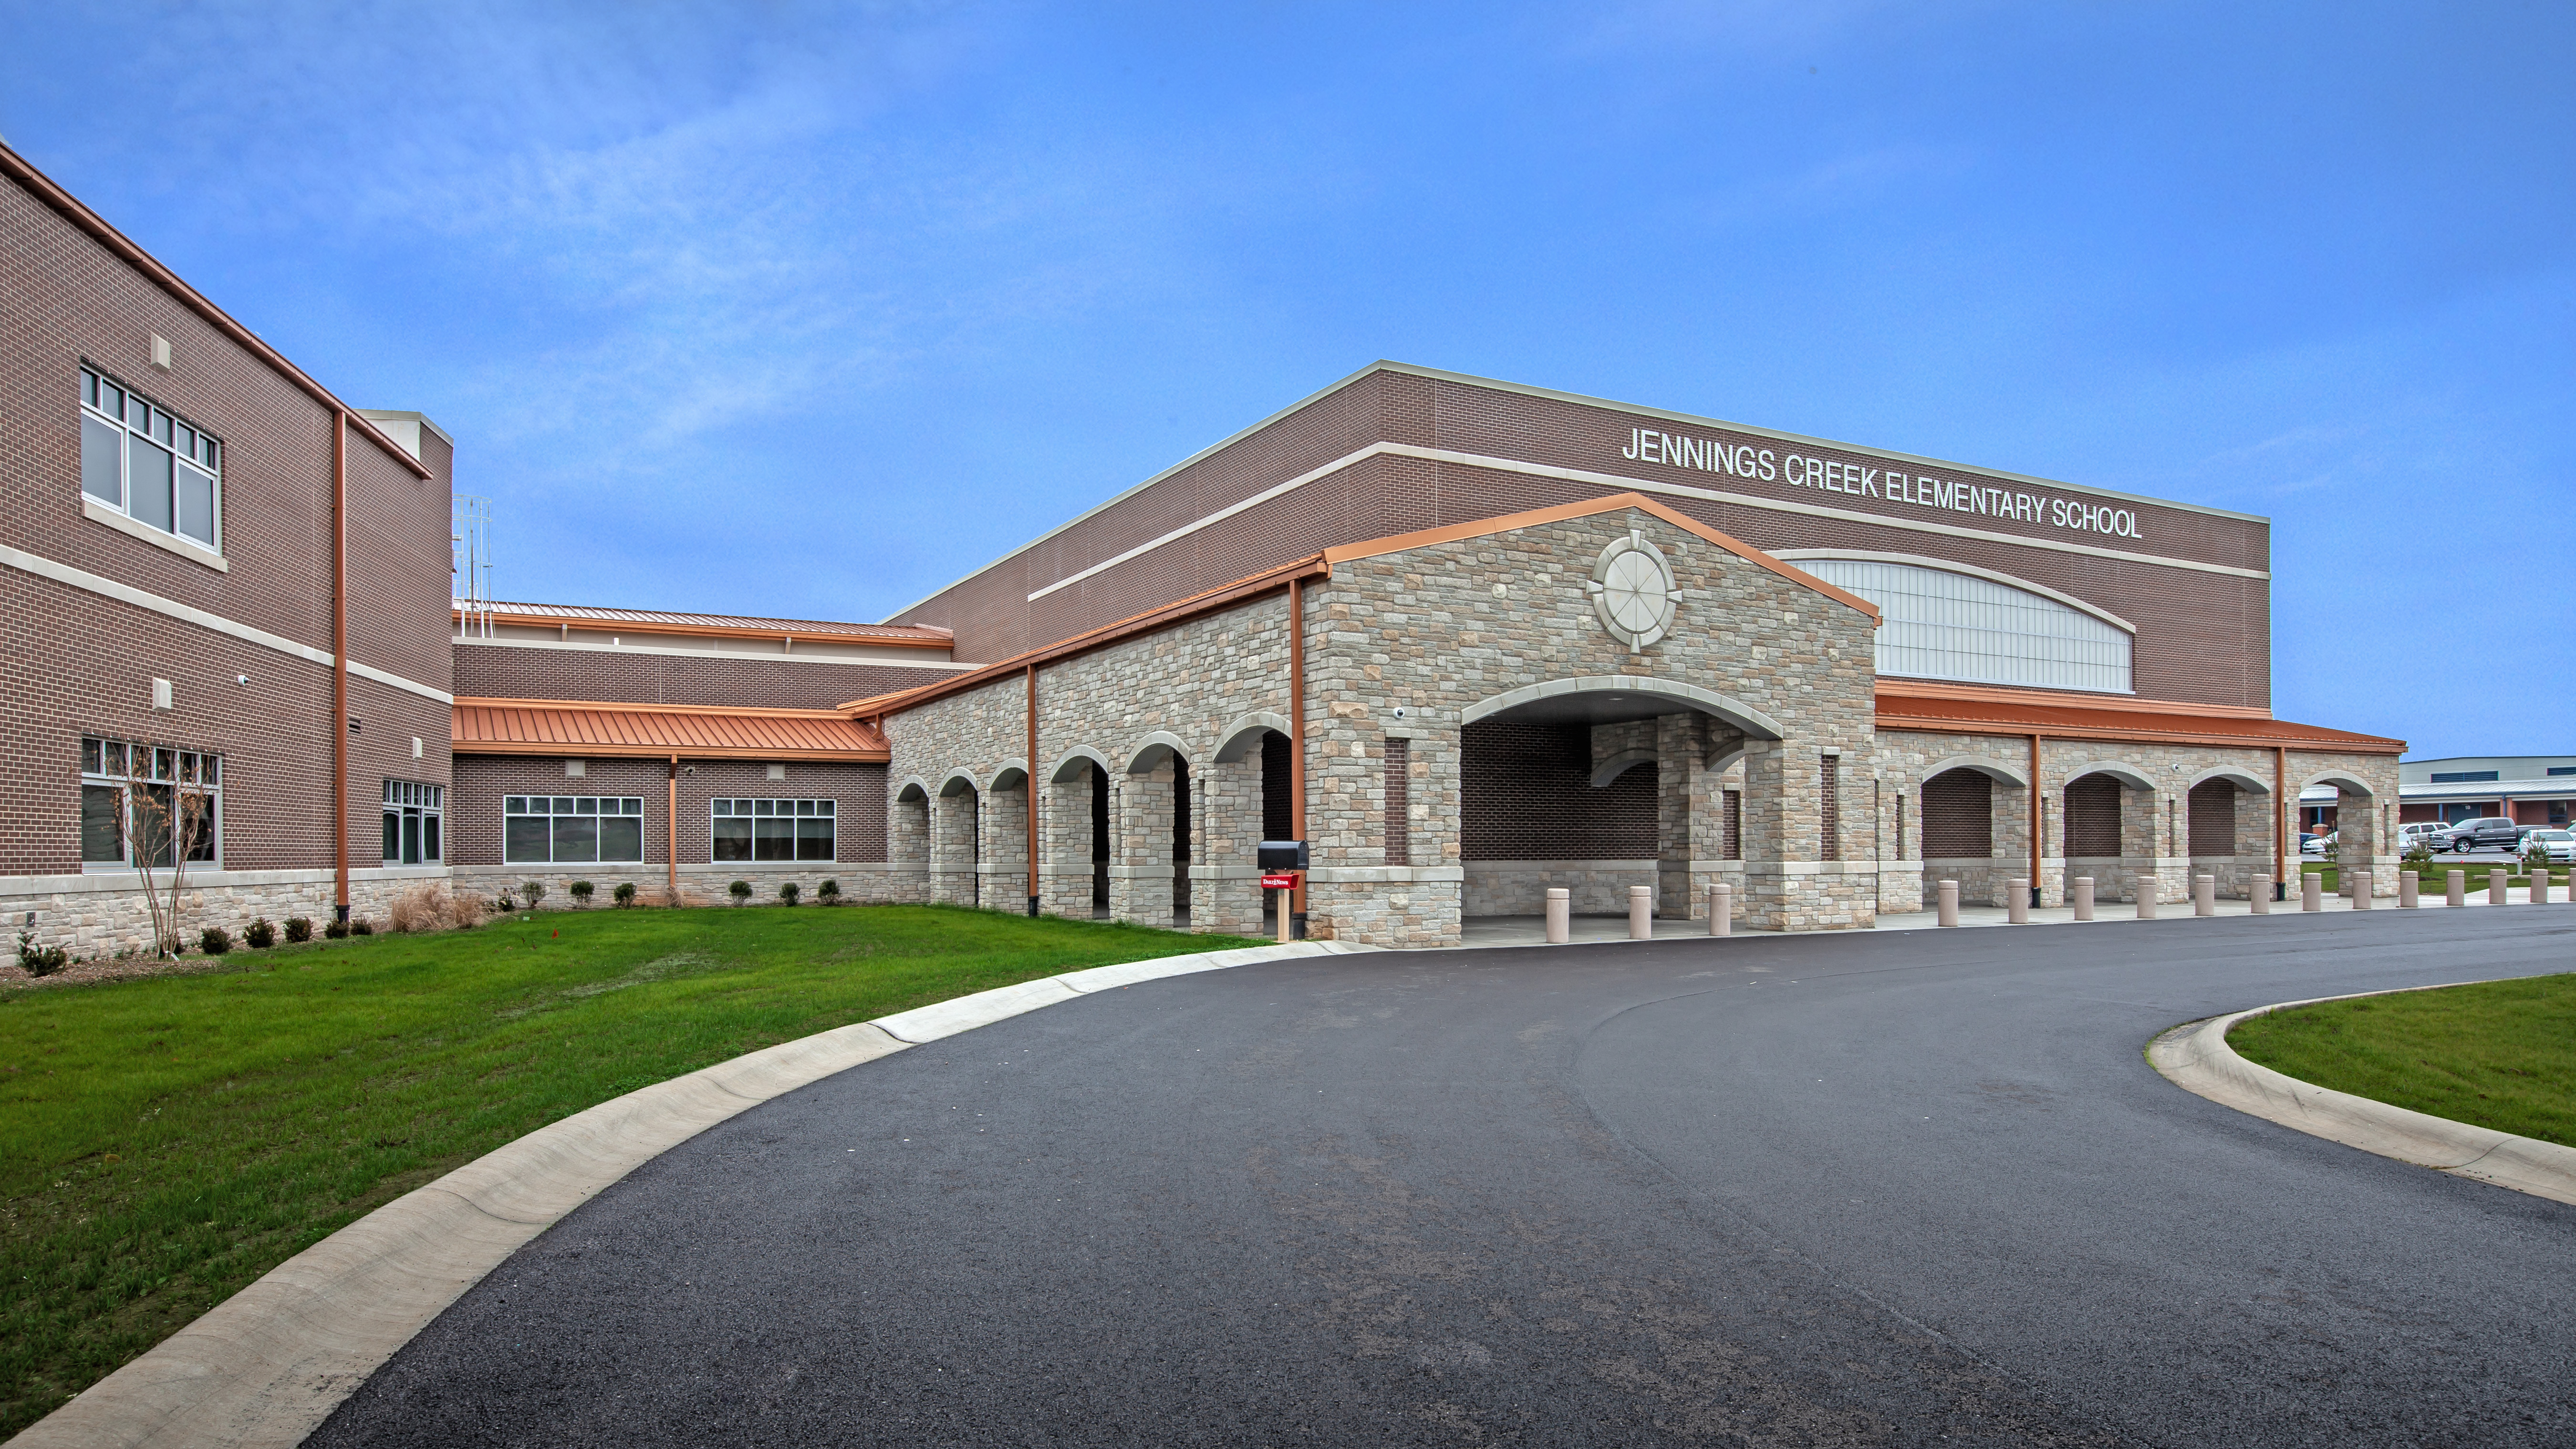 Located within a campus shared with the existing Henry Moss Middle School, Jennings Creek Elementary will encourage Integrated Learning, between the two facilities and promote a P-8 campus